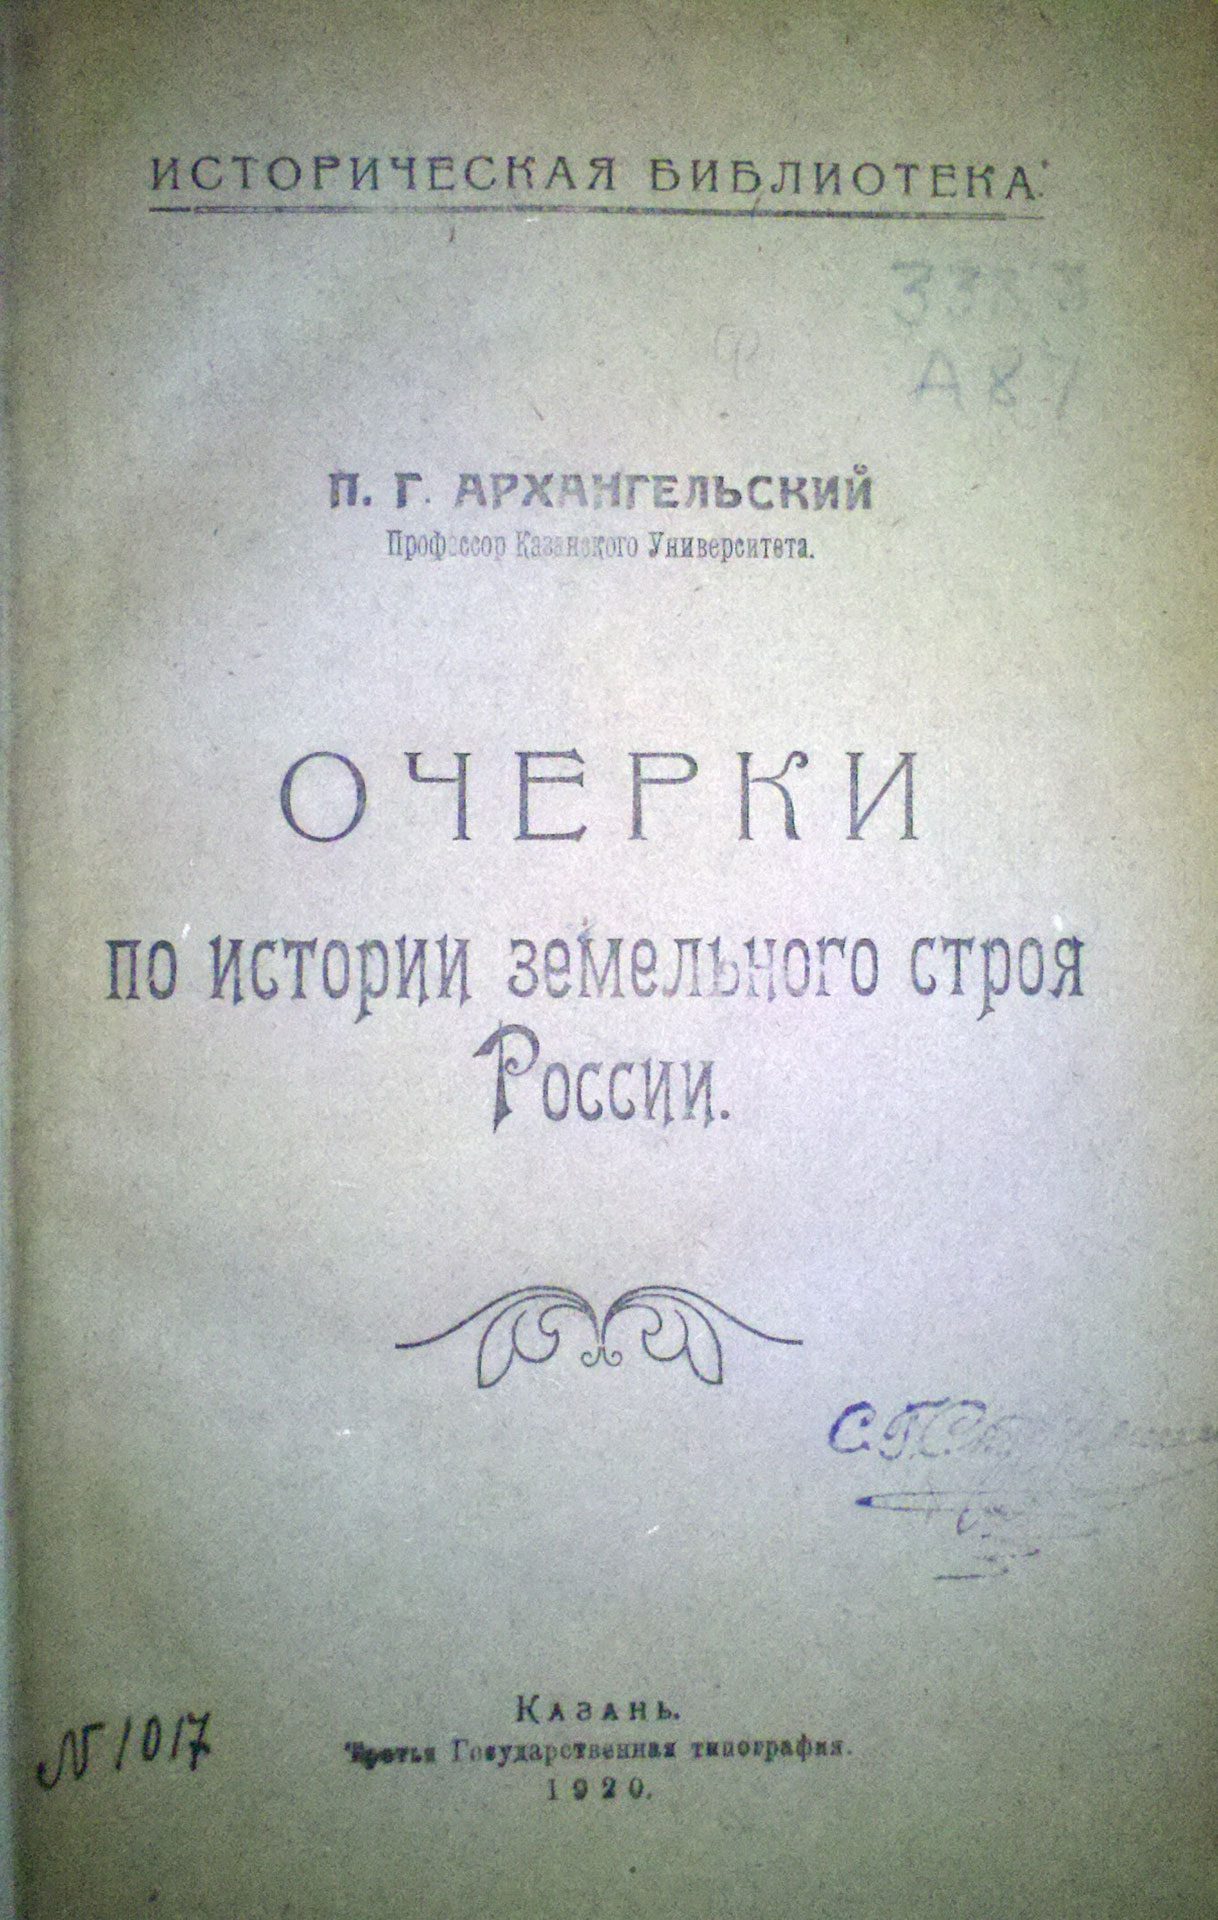 Almanakh Grif. 1903-1913./The Almanac of Grief. 1903-1913. In Russian (ask us if in doubt) - landofmagazines.com